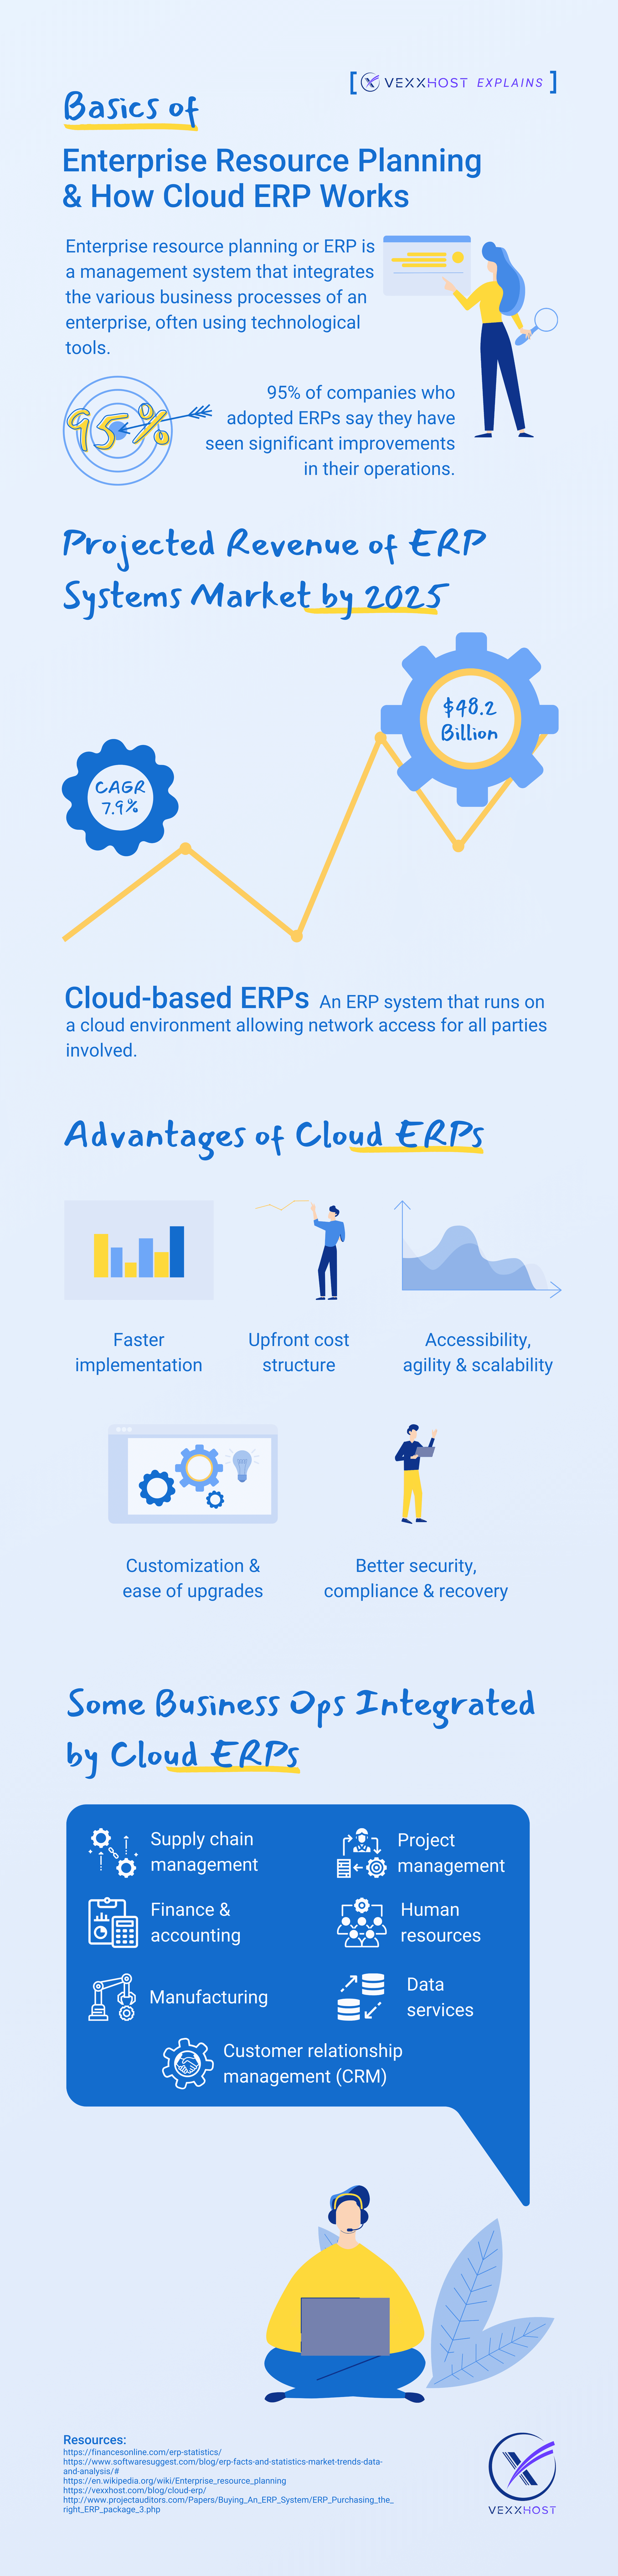 Basics of Enterprise Resource Planning and How Cloud ERP Works